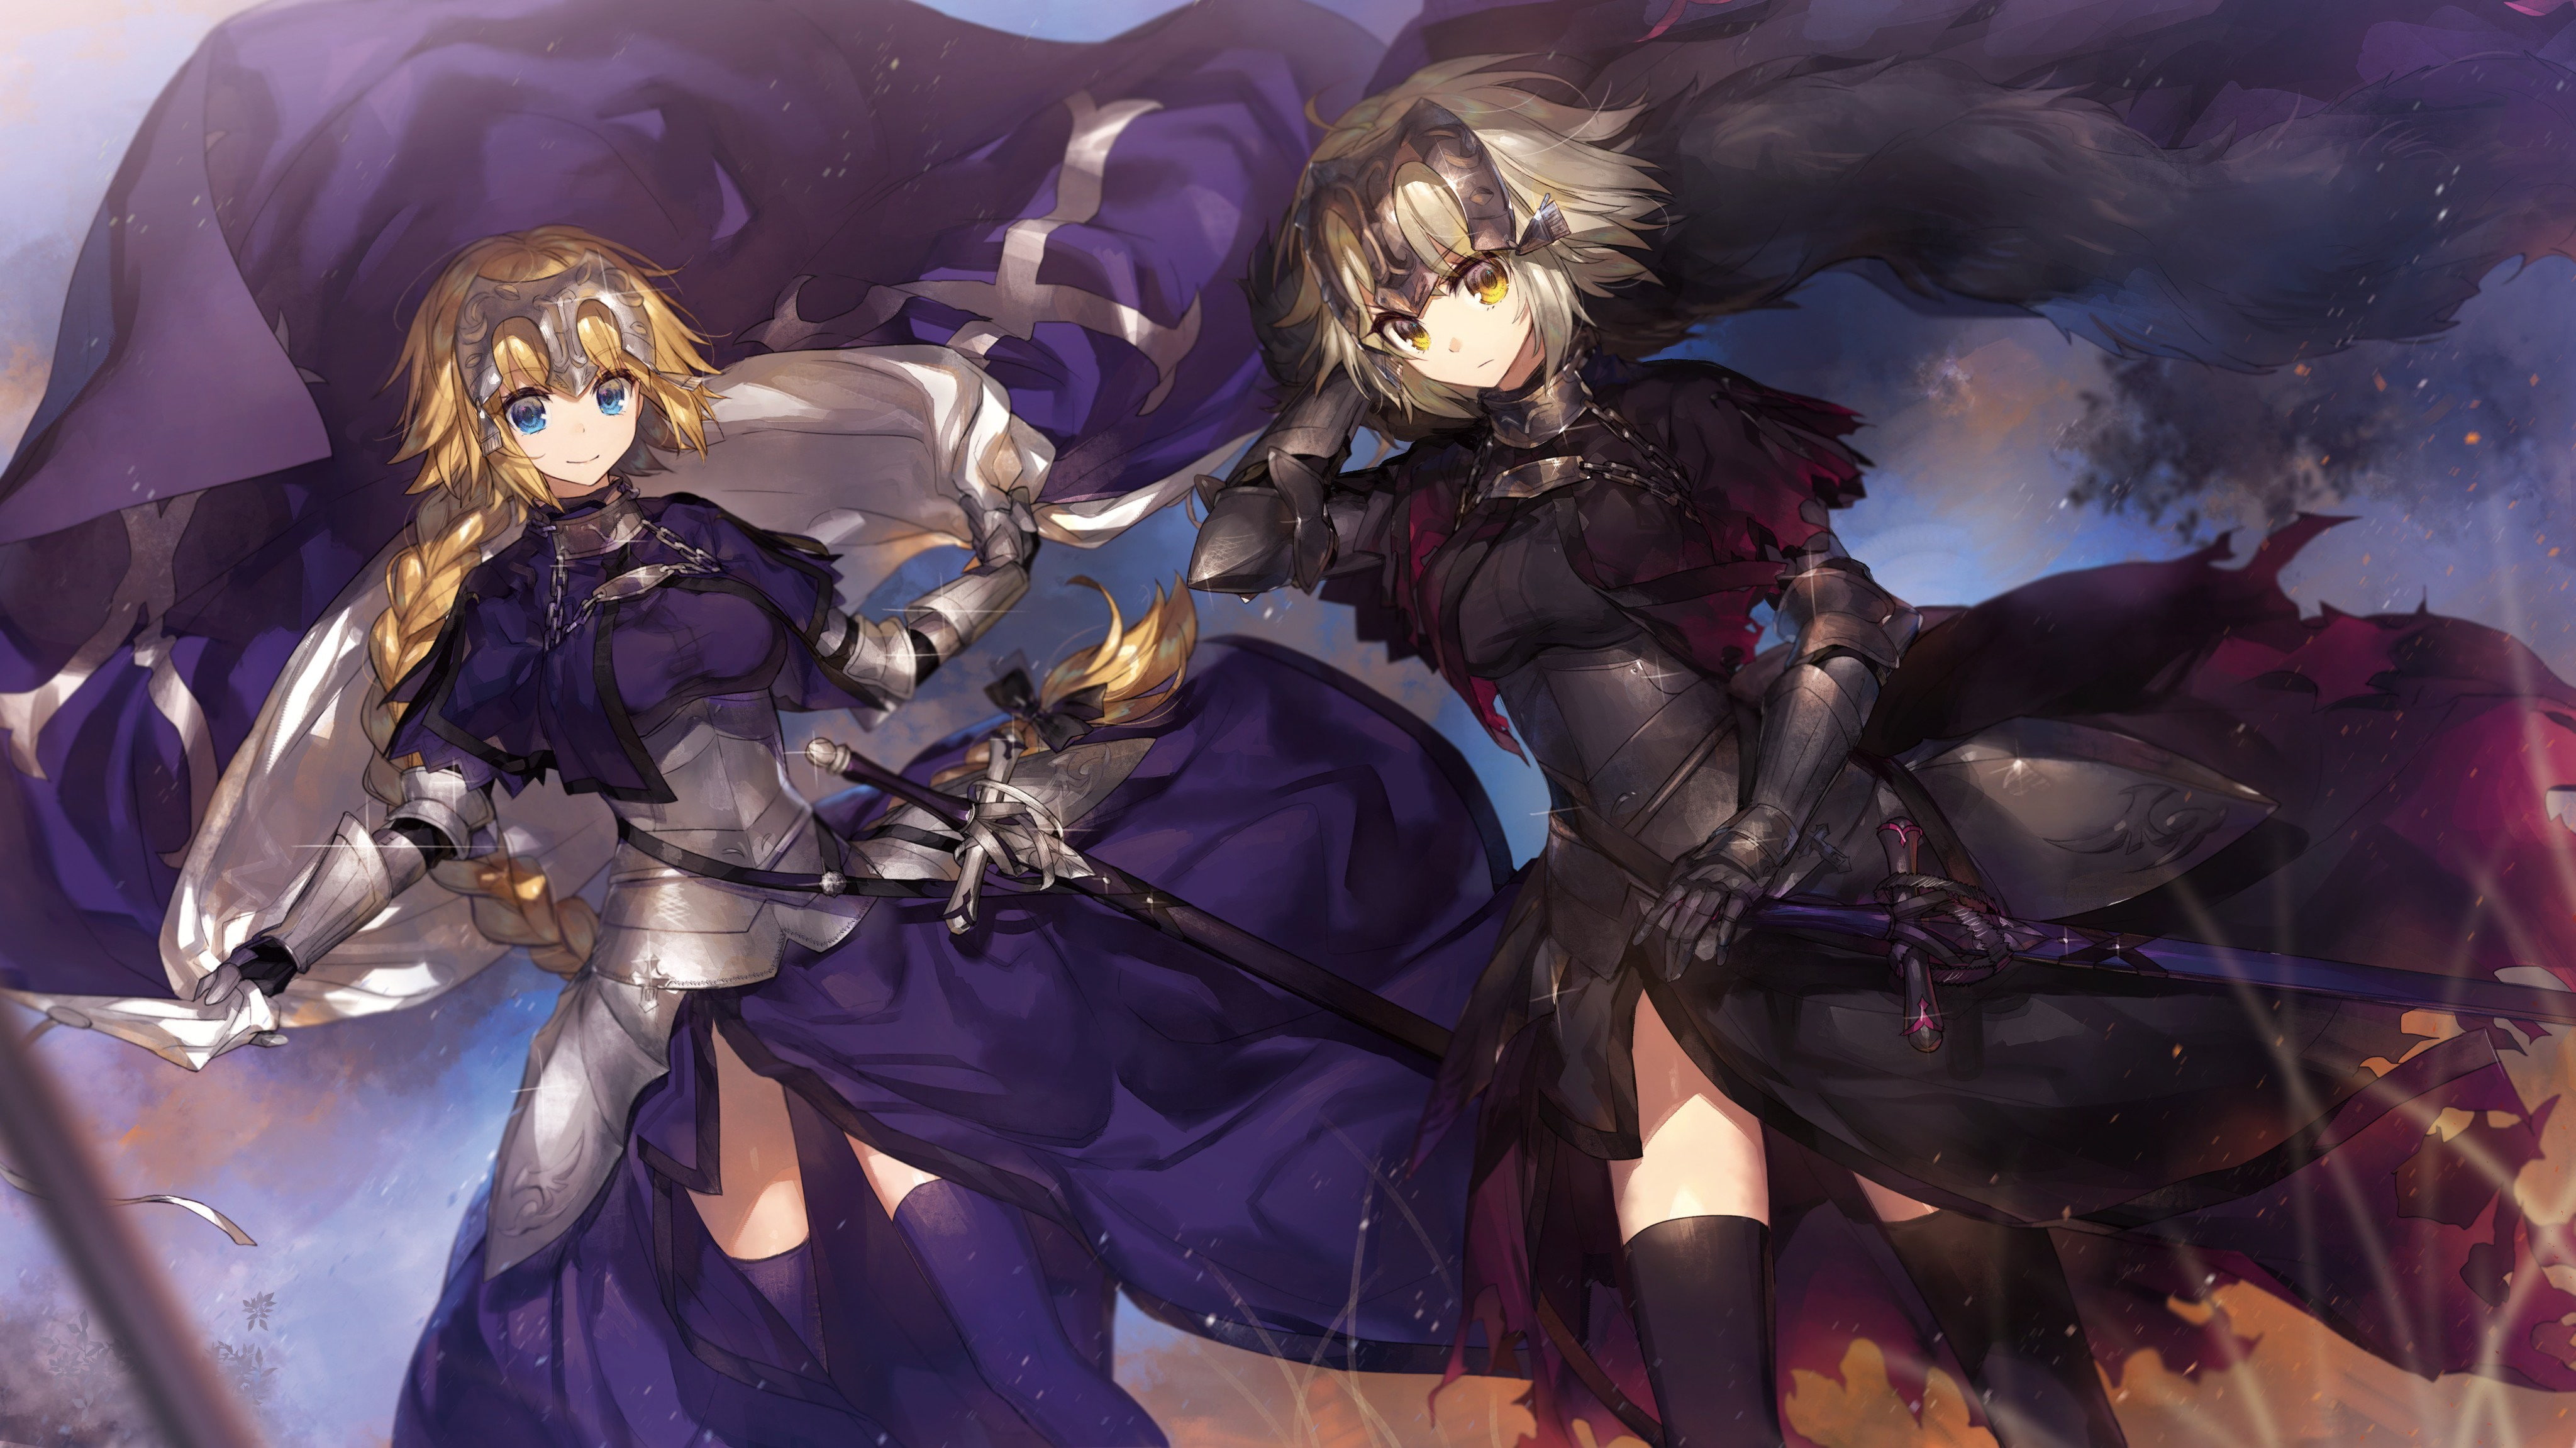 Jeanne darc alter  FateStay Night  FateGrand Order  Jeanne dArc  dress  thigh-highs  FateApocrypha  armor